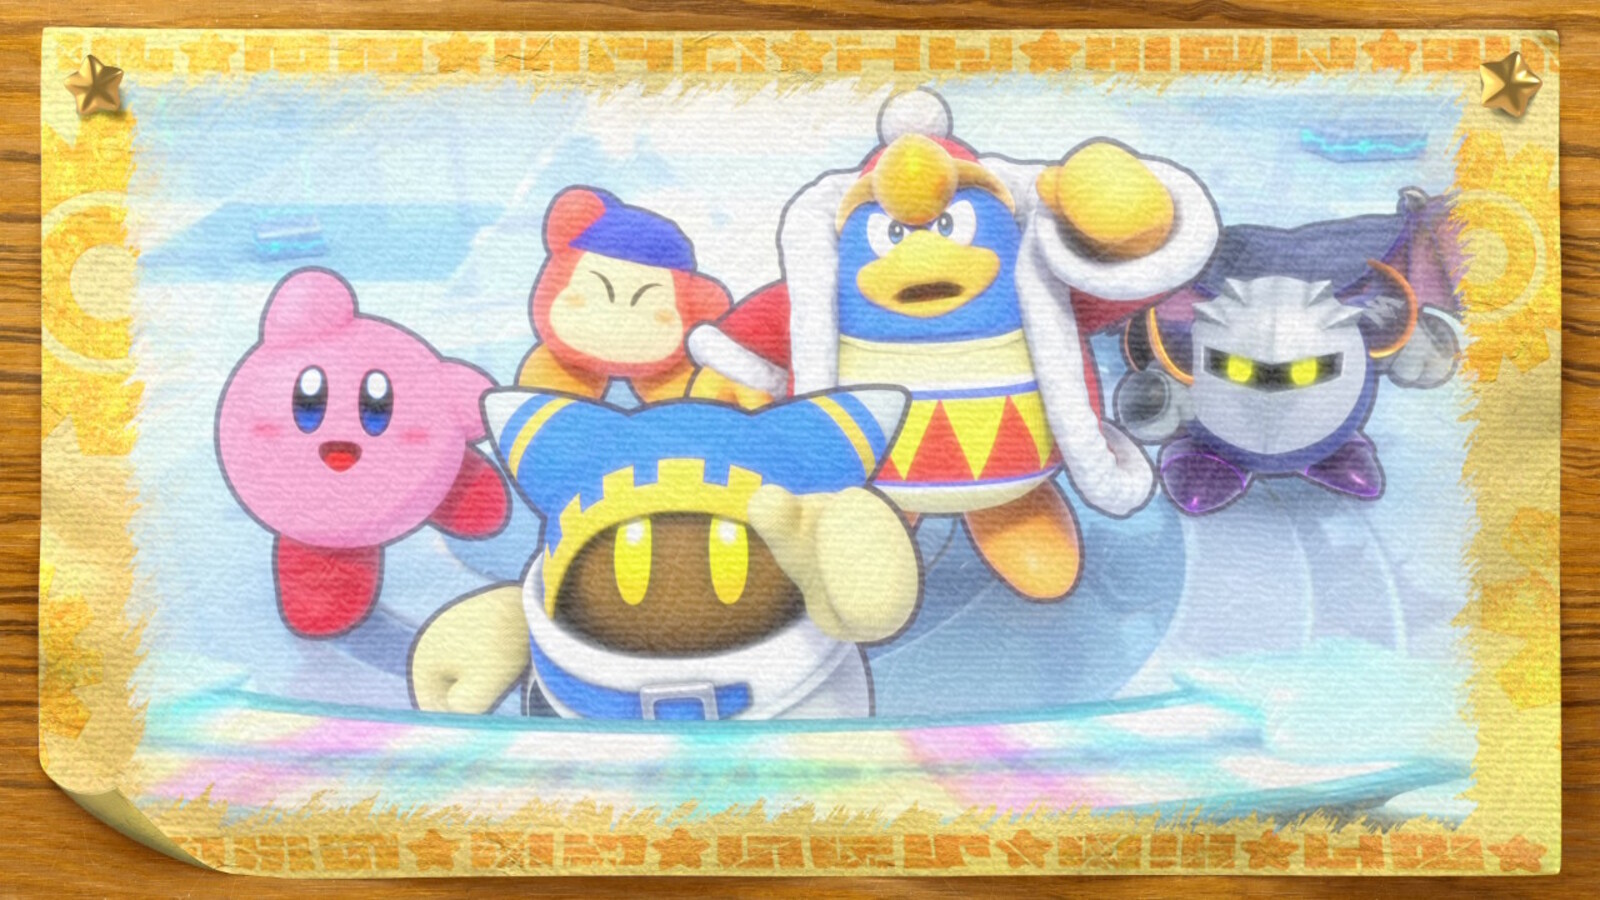 Kirby's Return to Dream Land (Nintendo Wii) Review